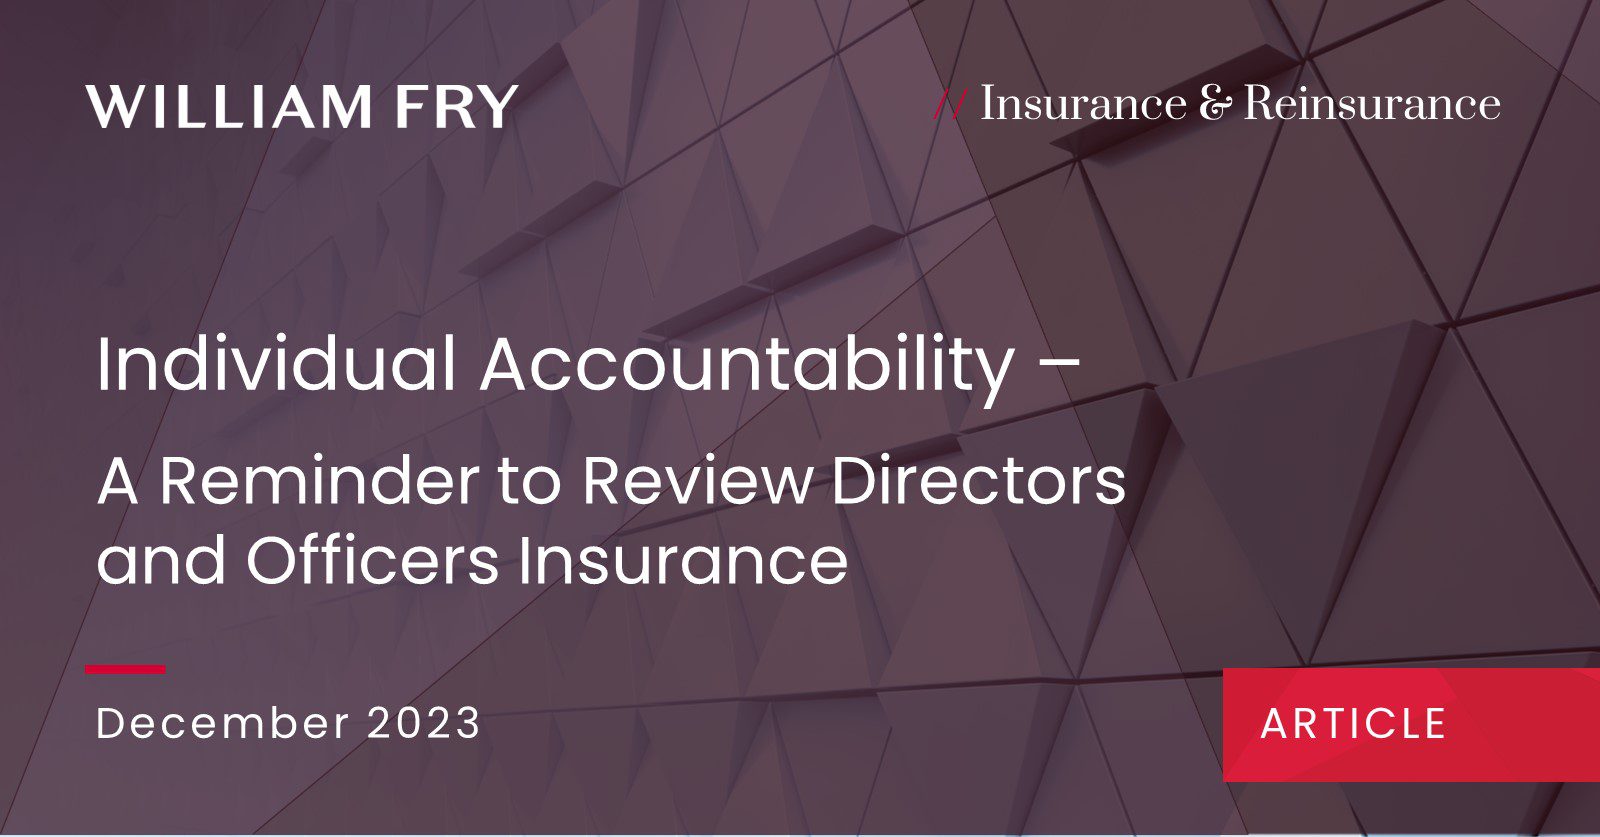 Individual Accountability – A Reminder to Review Directors and Officers Insurance